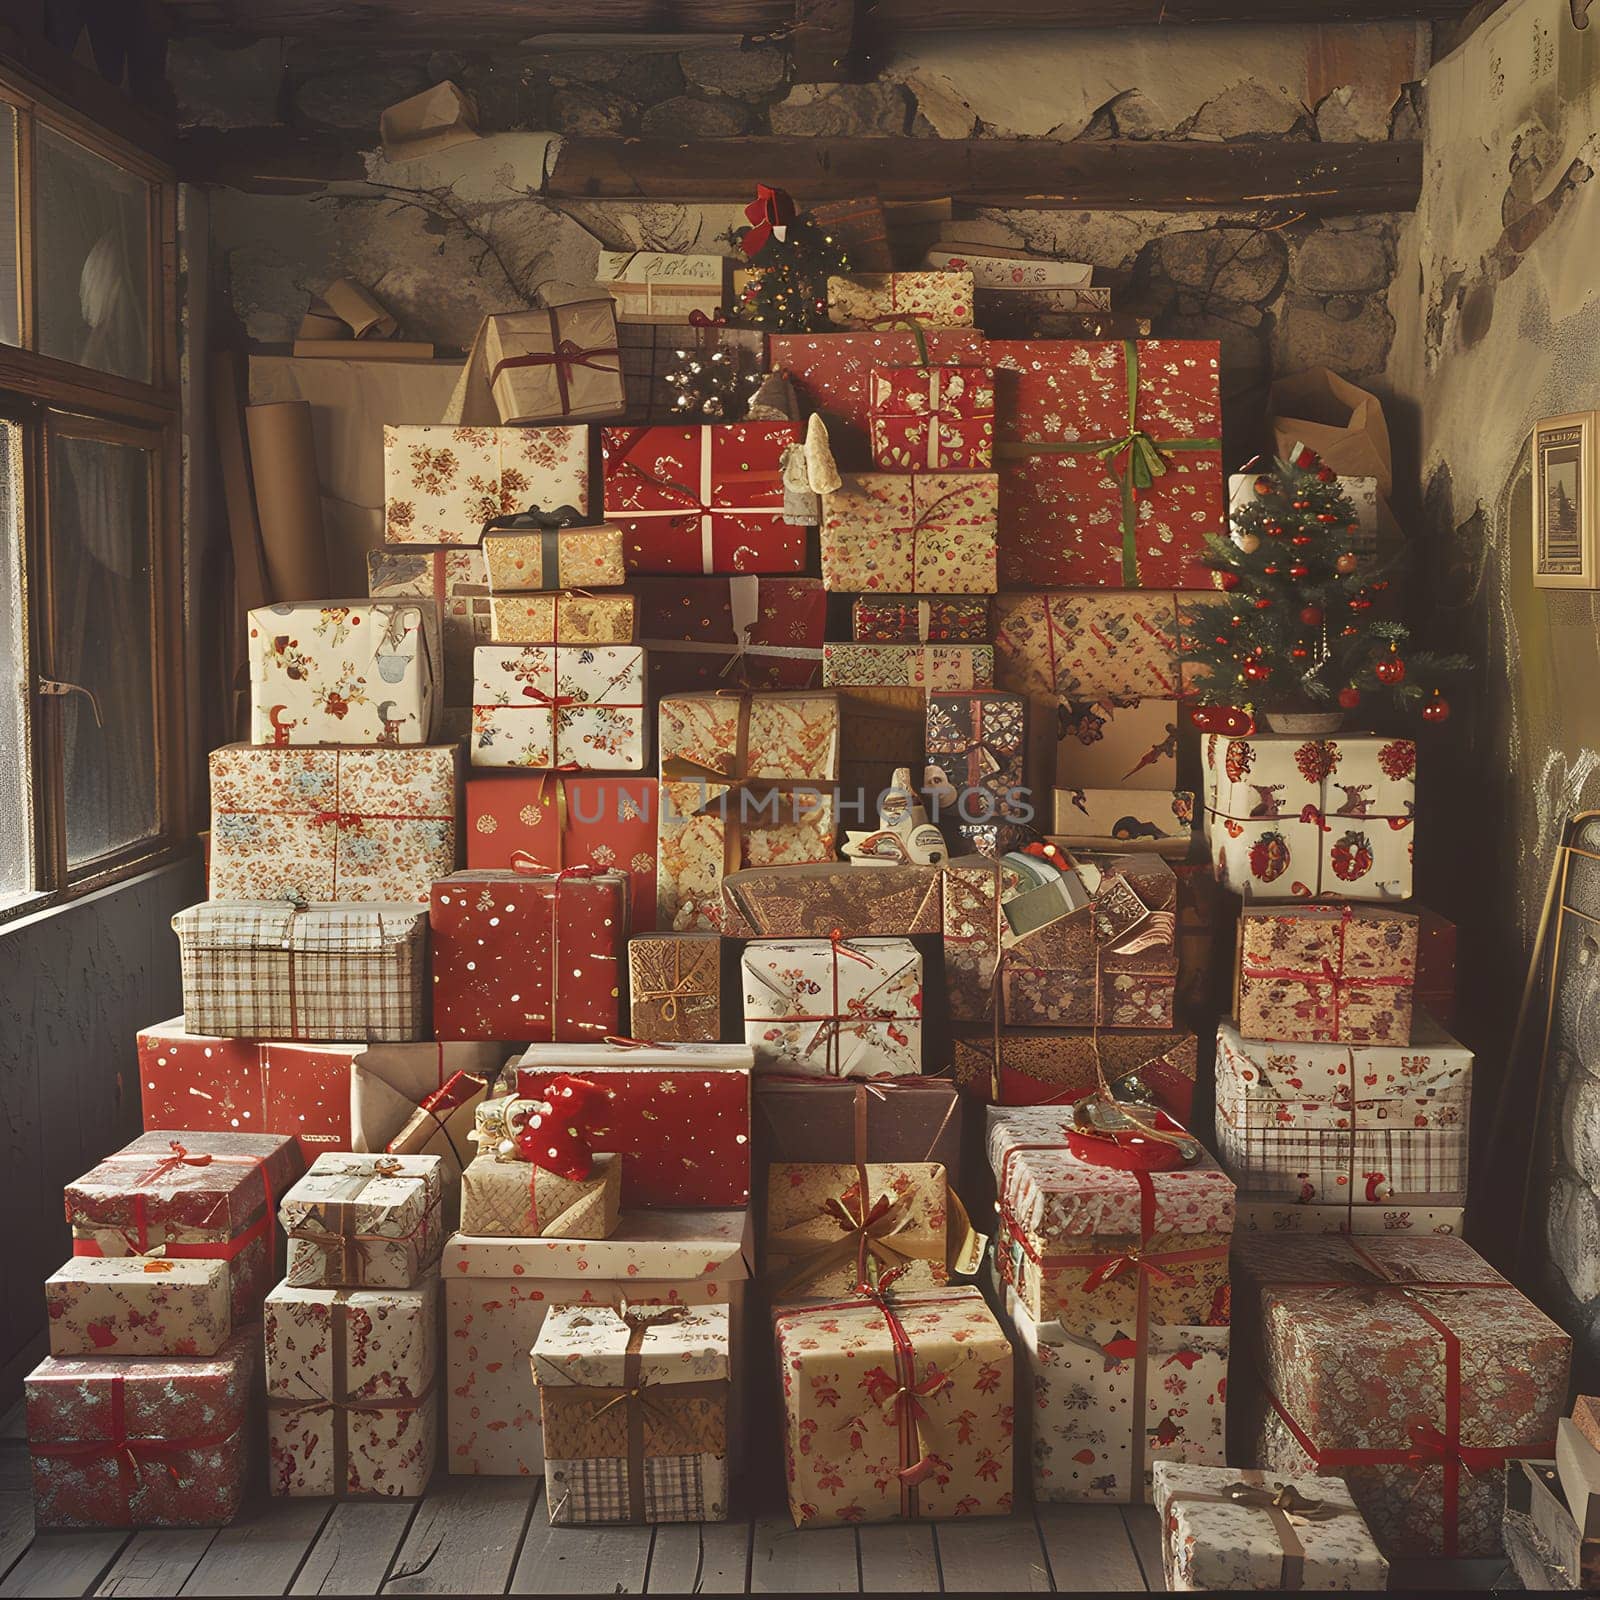 Tower of Christmas gifts stacked high, resembling a foodfilled city skyline by Nadtochiy